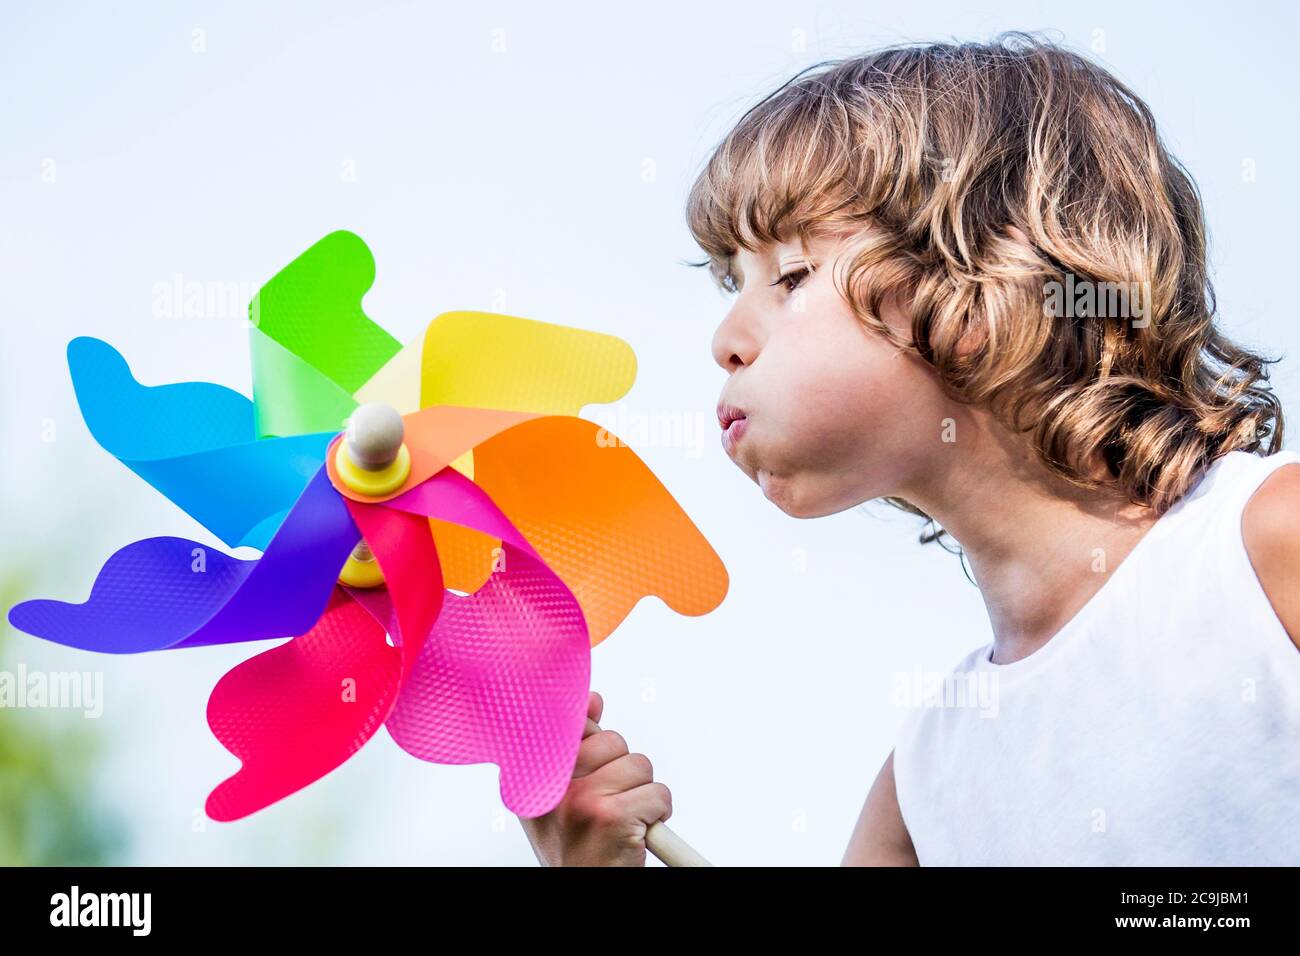 Boy blowing colourful paper windmill in park. Stock Photo